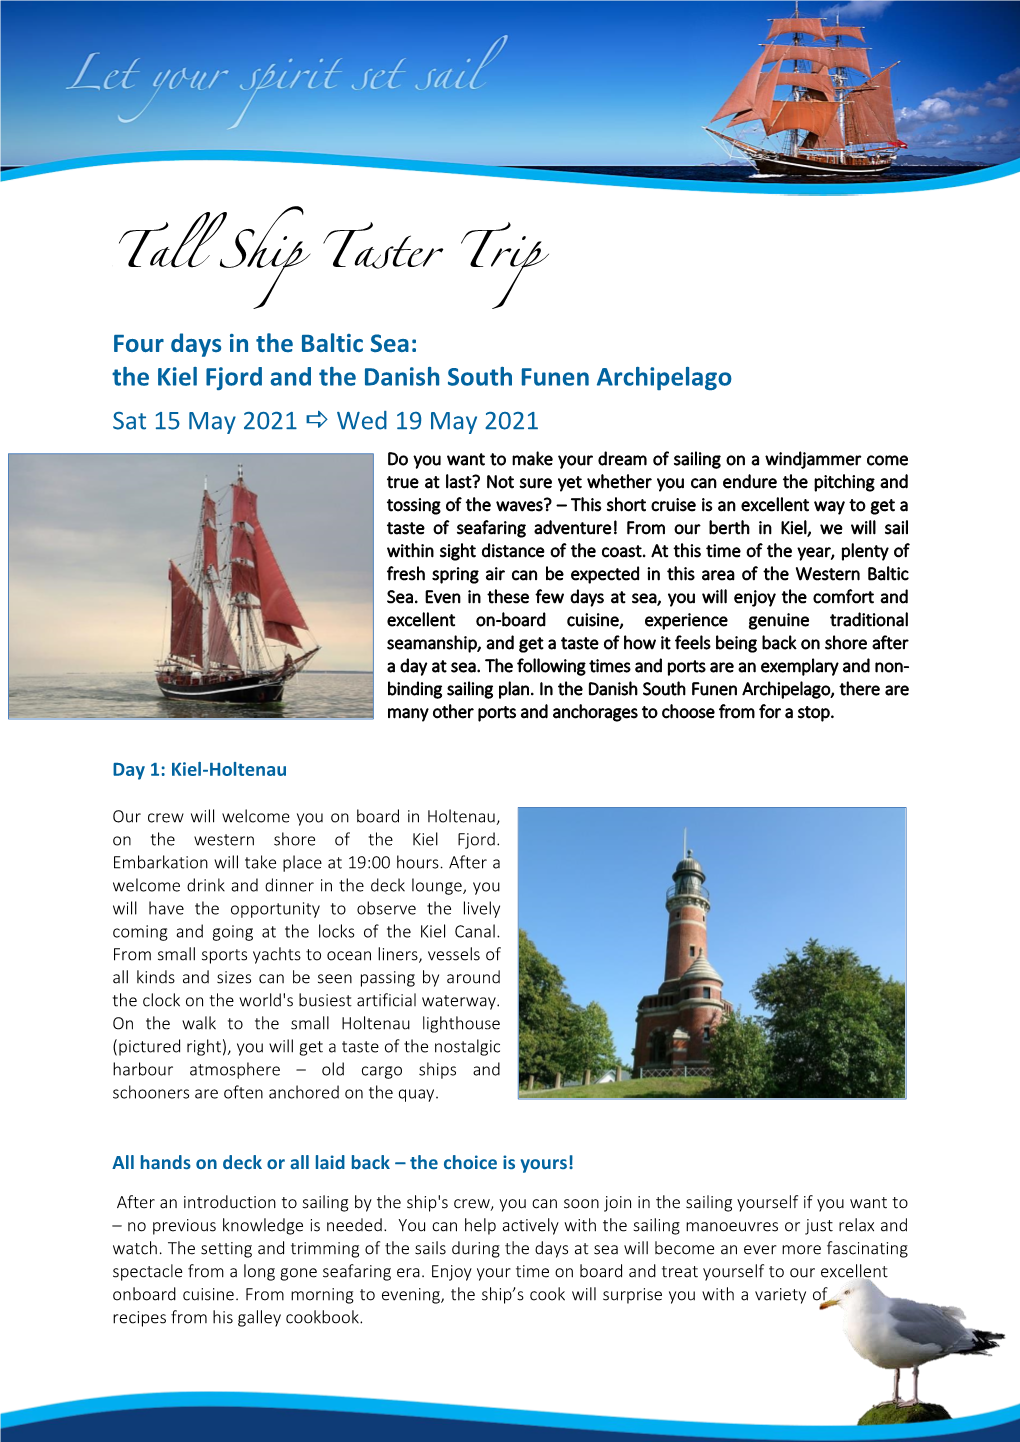 Ltall Ship Taster Trip Four Days in the Baltic Sea: the Kiel Fjord and the Danish South Funen Archipelago